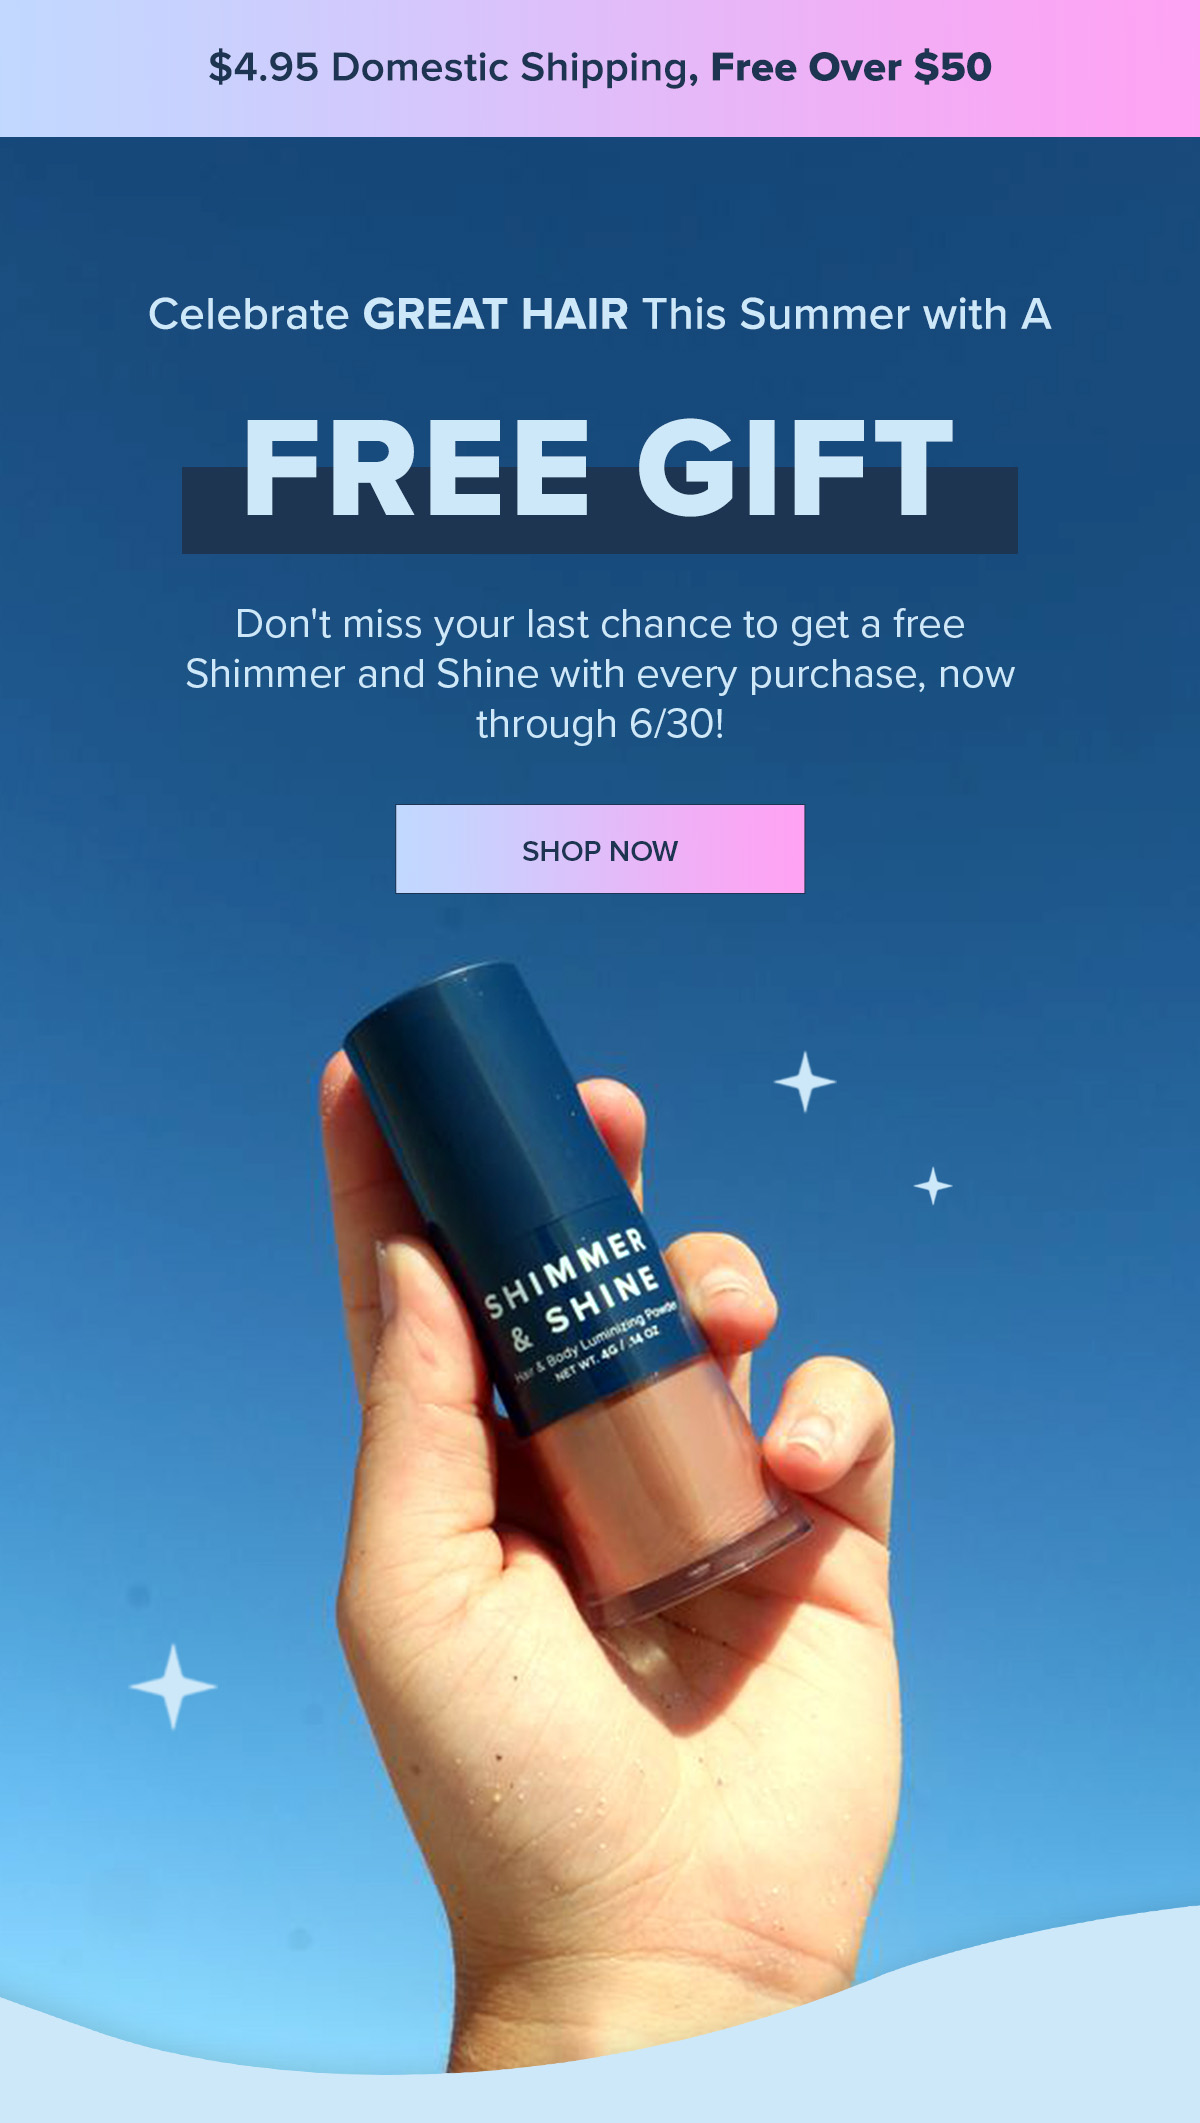 Celebrate Great Hair This Summer with a Free Gift